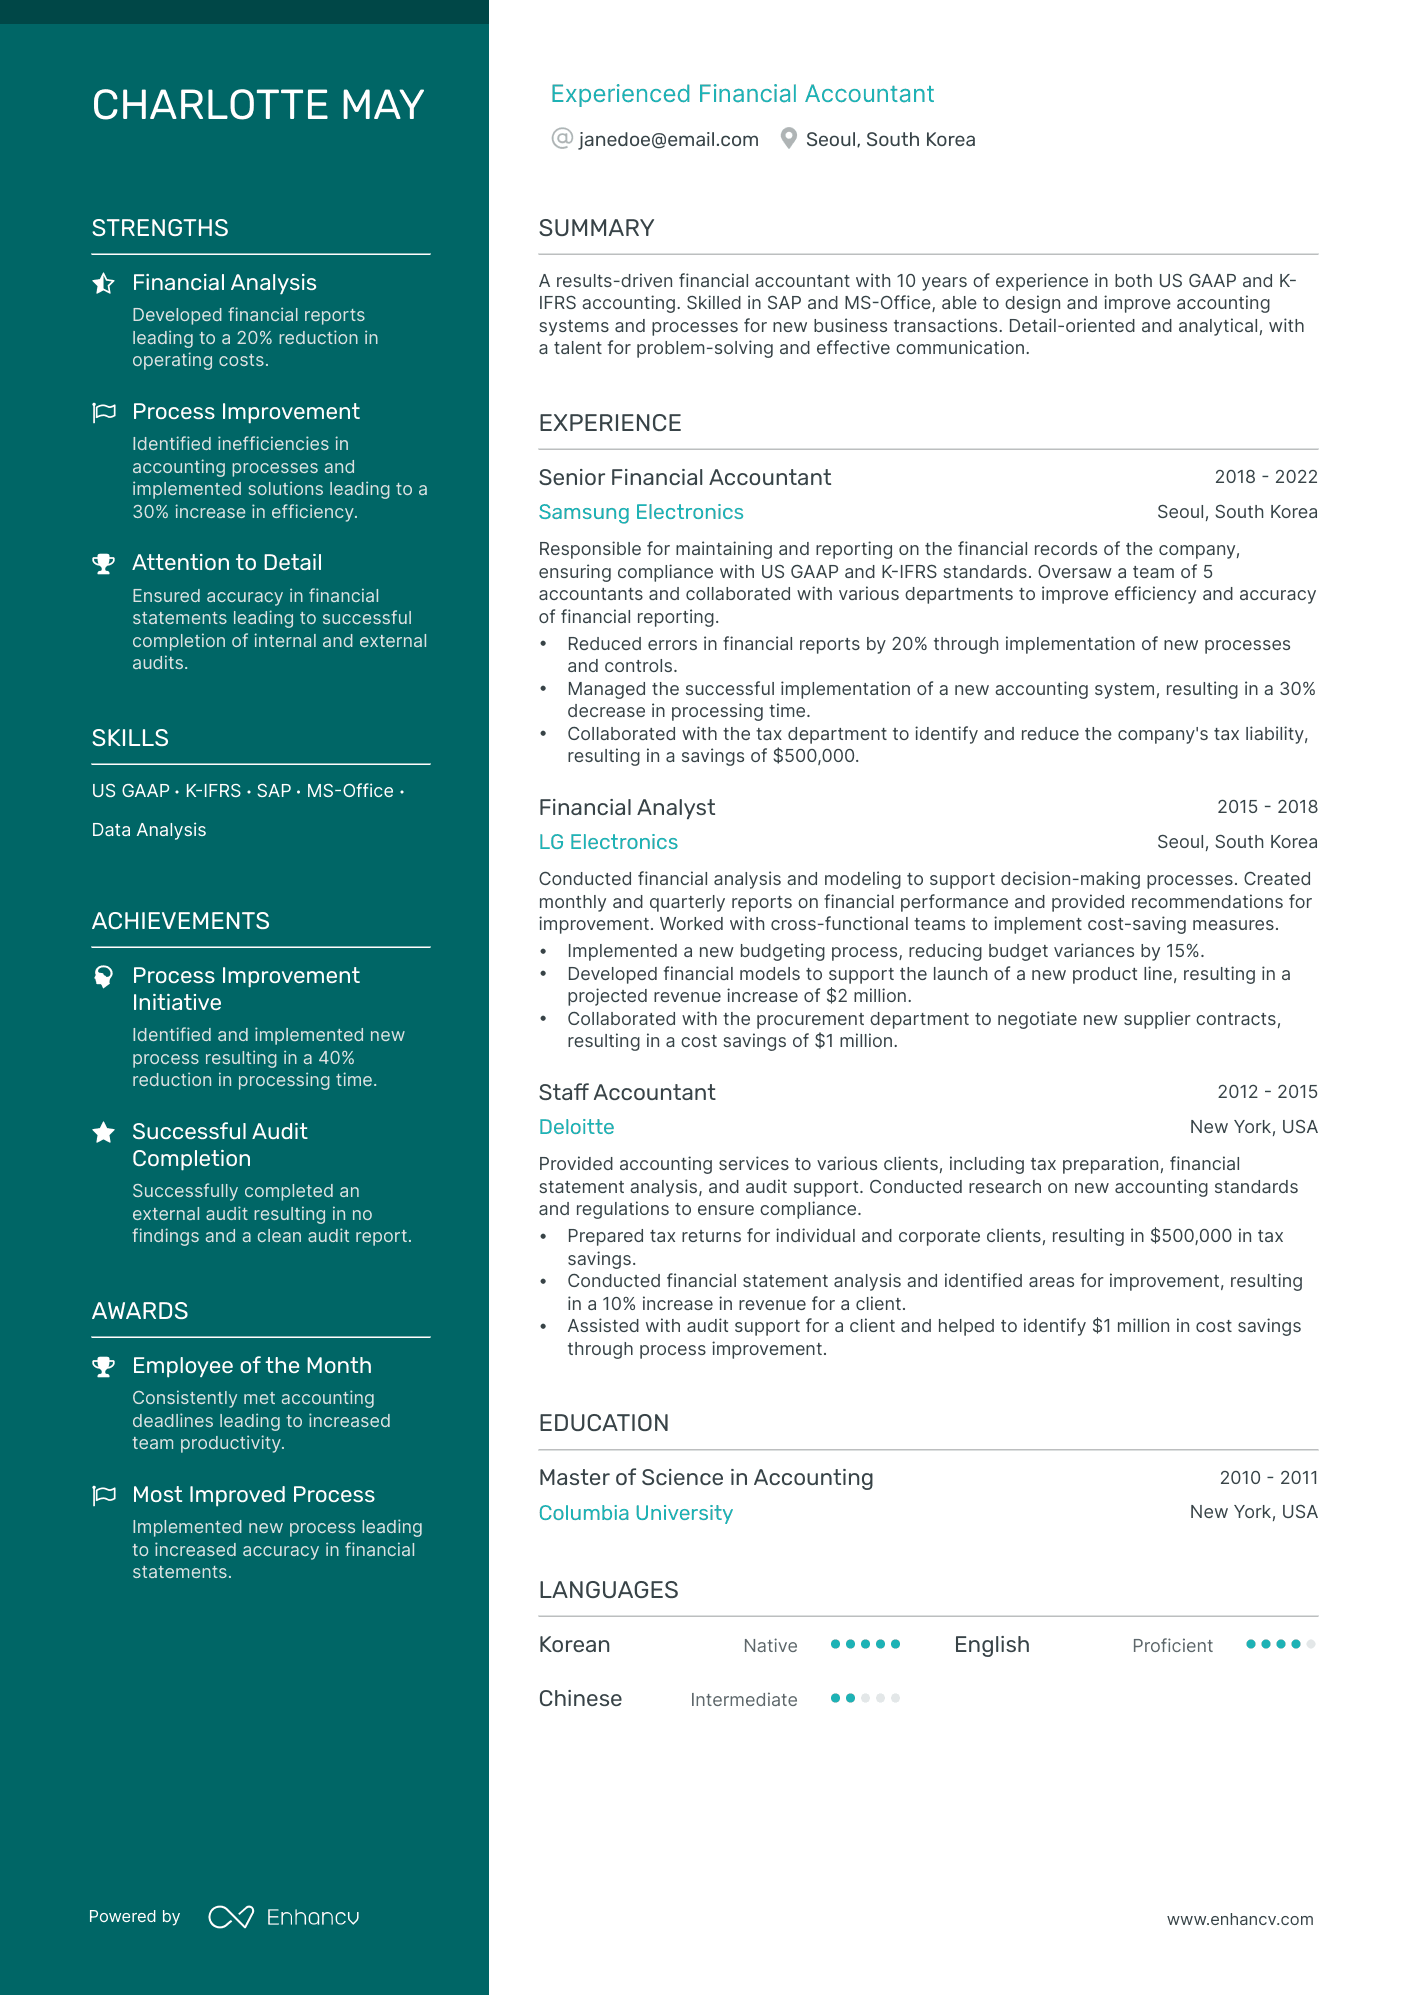 Experienced Financial Accountant resume example